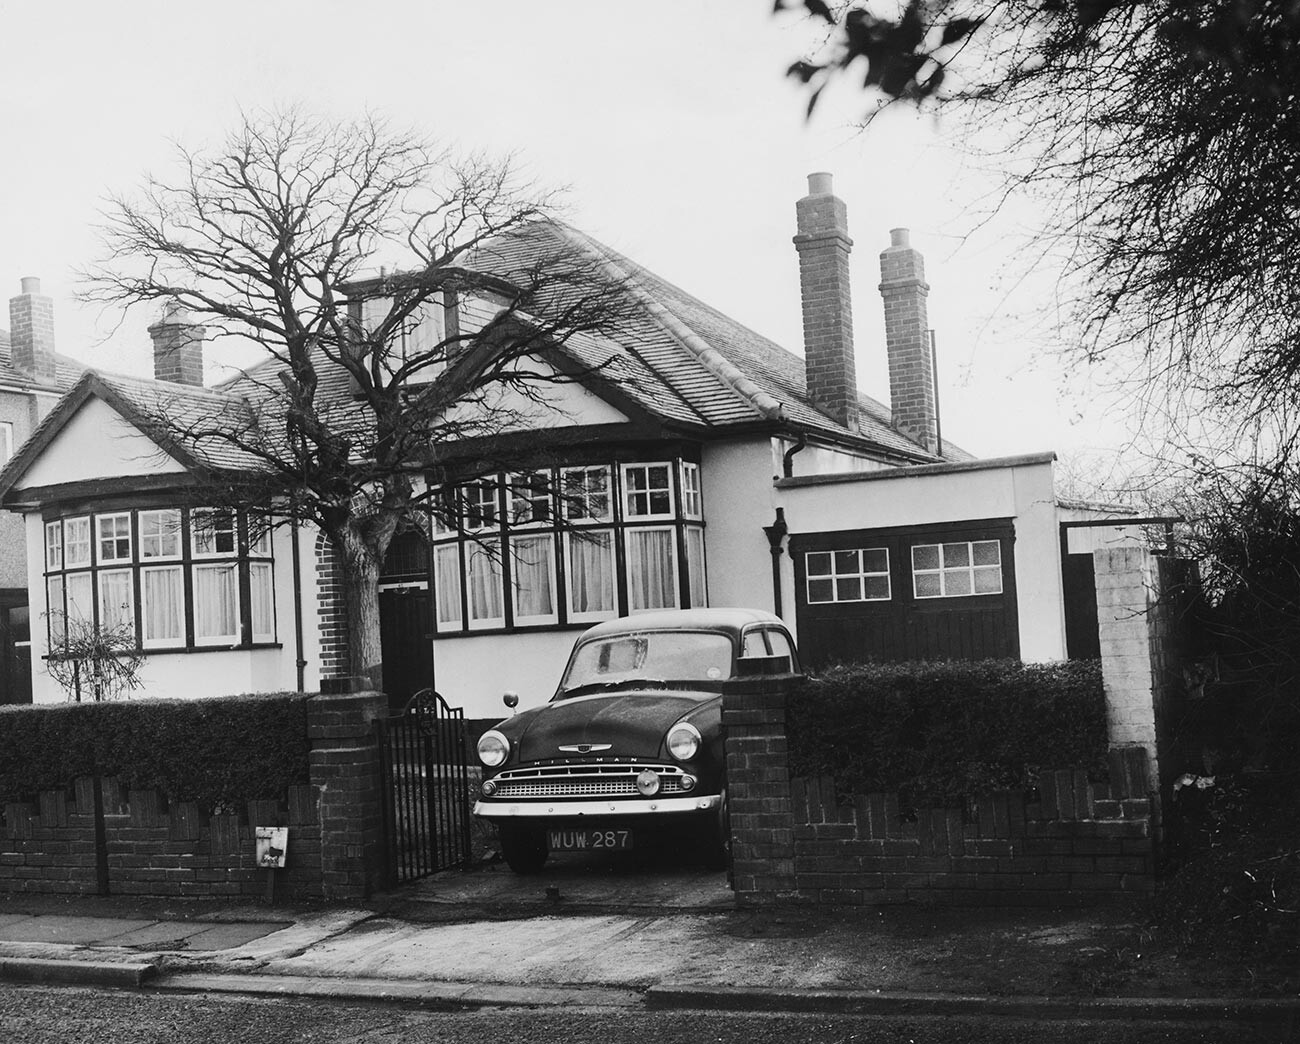 A Hillman police car in the driveway of Cohen's bungalow in Ruislip, 9th January 1961. 